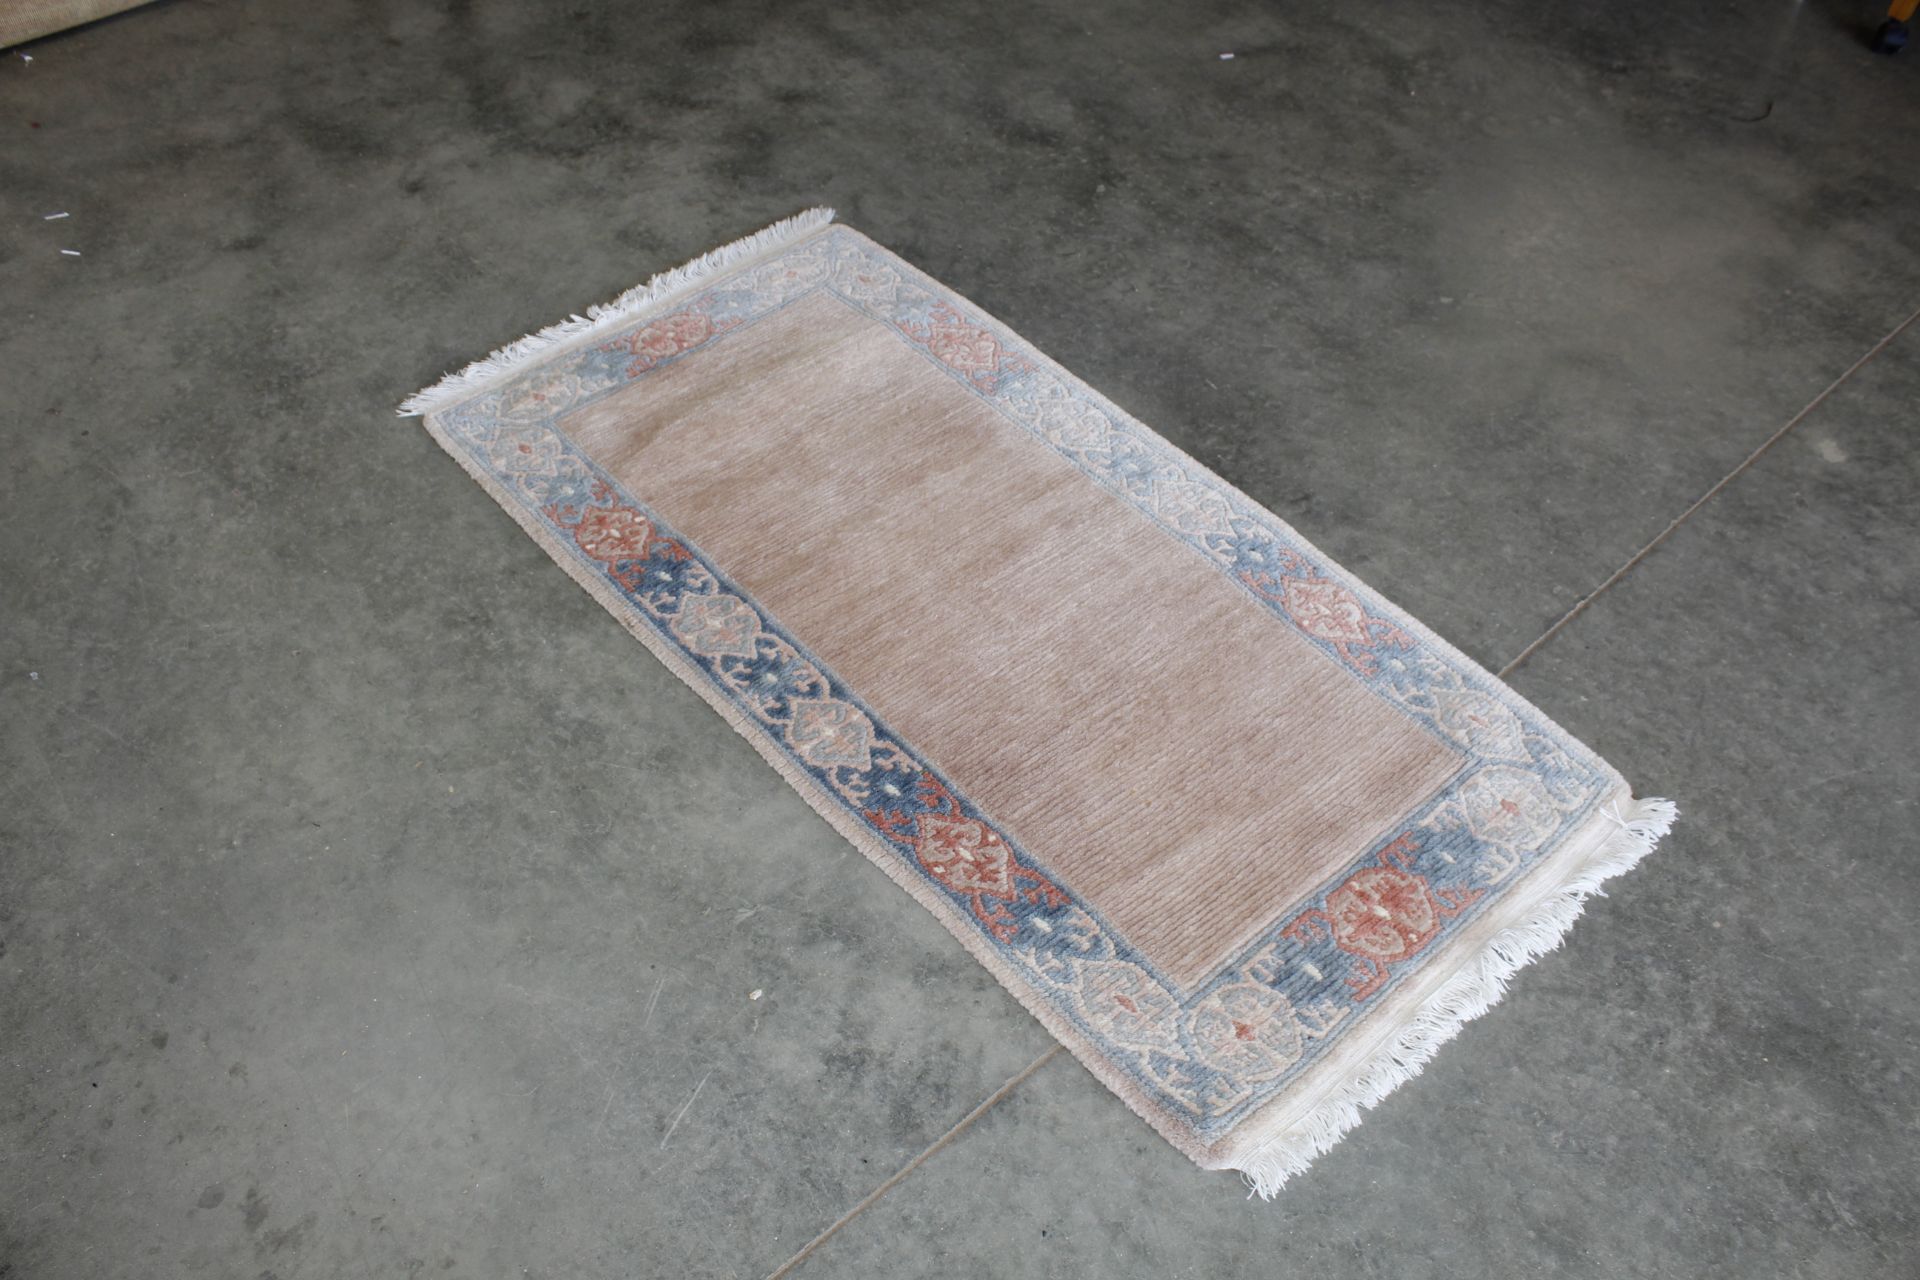 An approx. 5" x 2'4" patterned rug